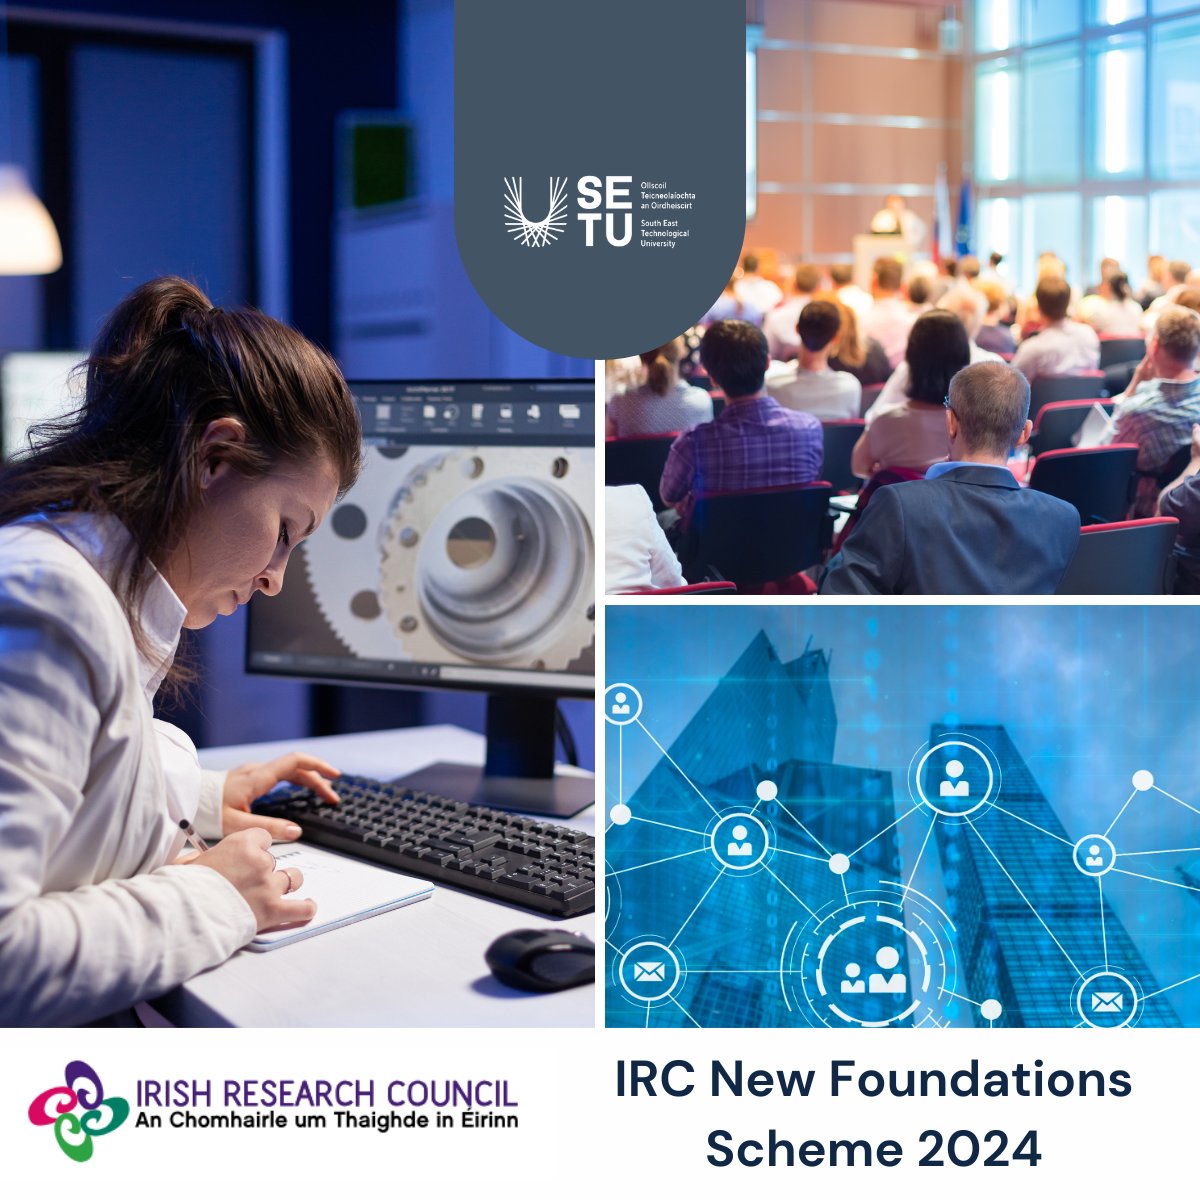 📣 IRC New Foundations Scheme 2024- call now open! We are delighted to bring to your attention a call for applications to the IRC New Foundations Scheme 2024, which provides support for research, networking and/or dissemination activities. The Irish Research Council are